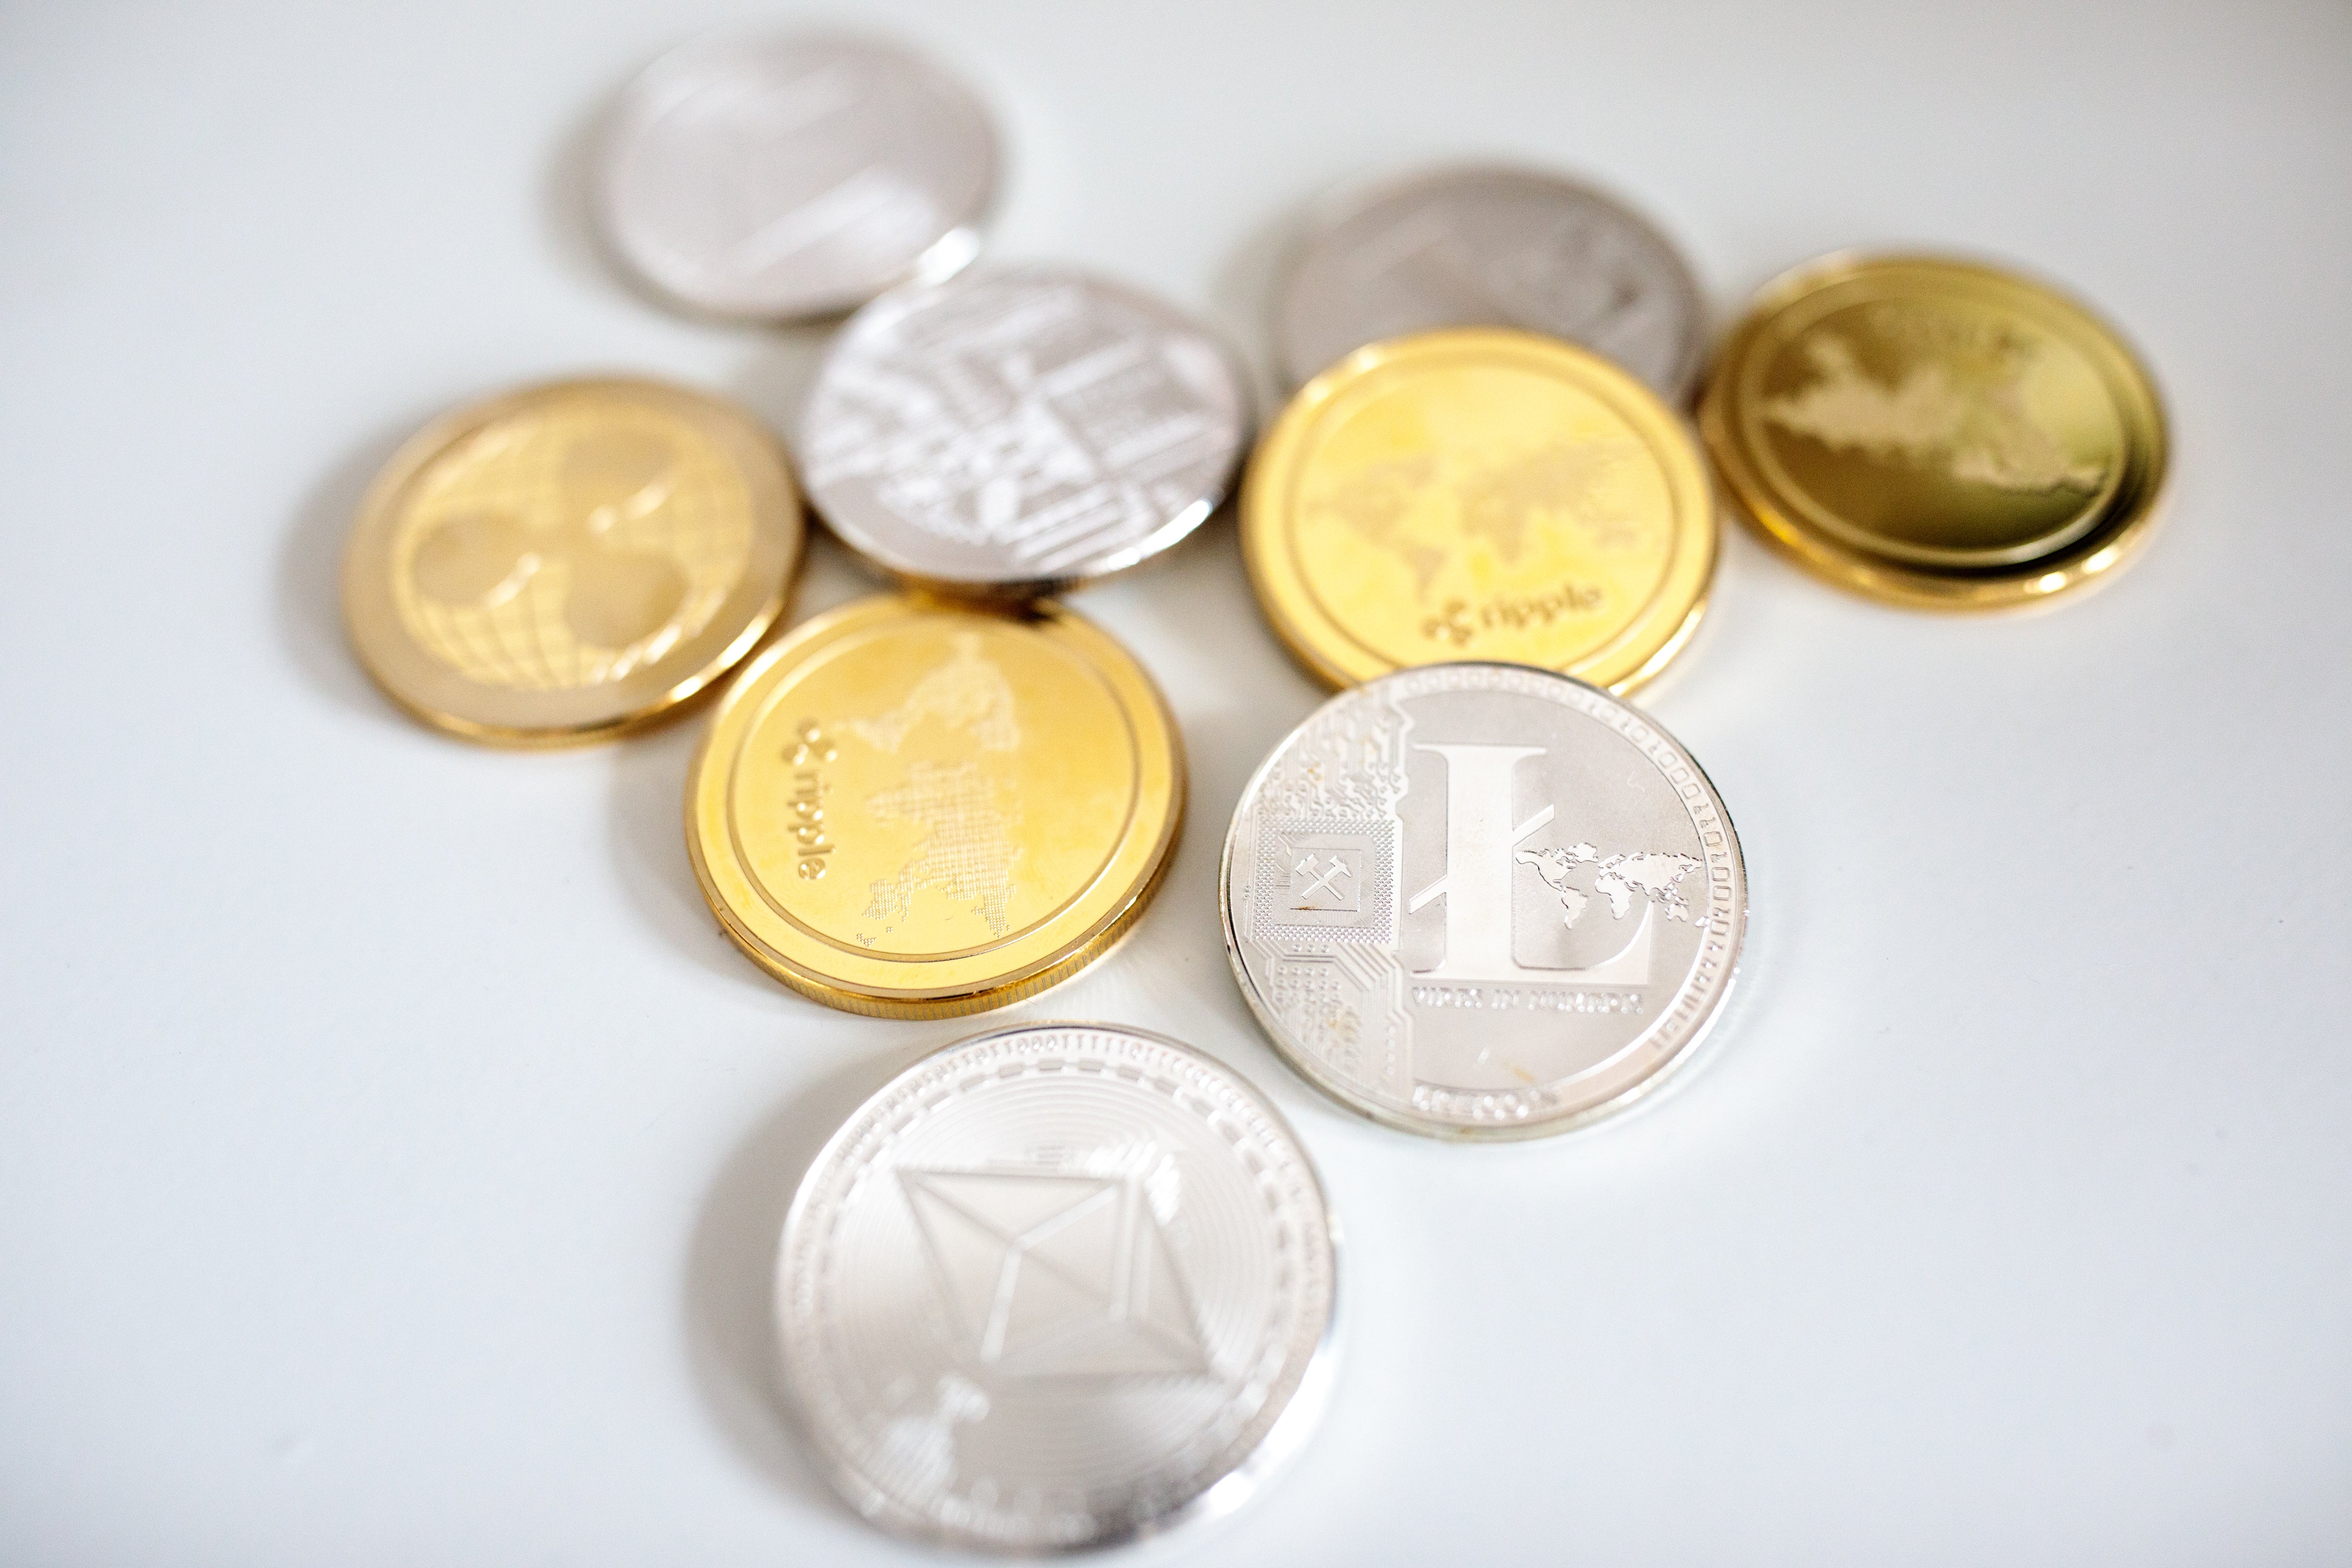 Types of cryptocurrency include Bitcoin, Dogecoin and Ethereum